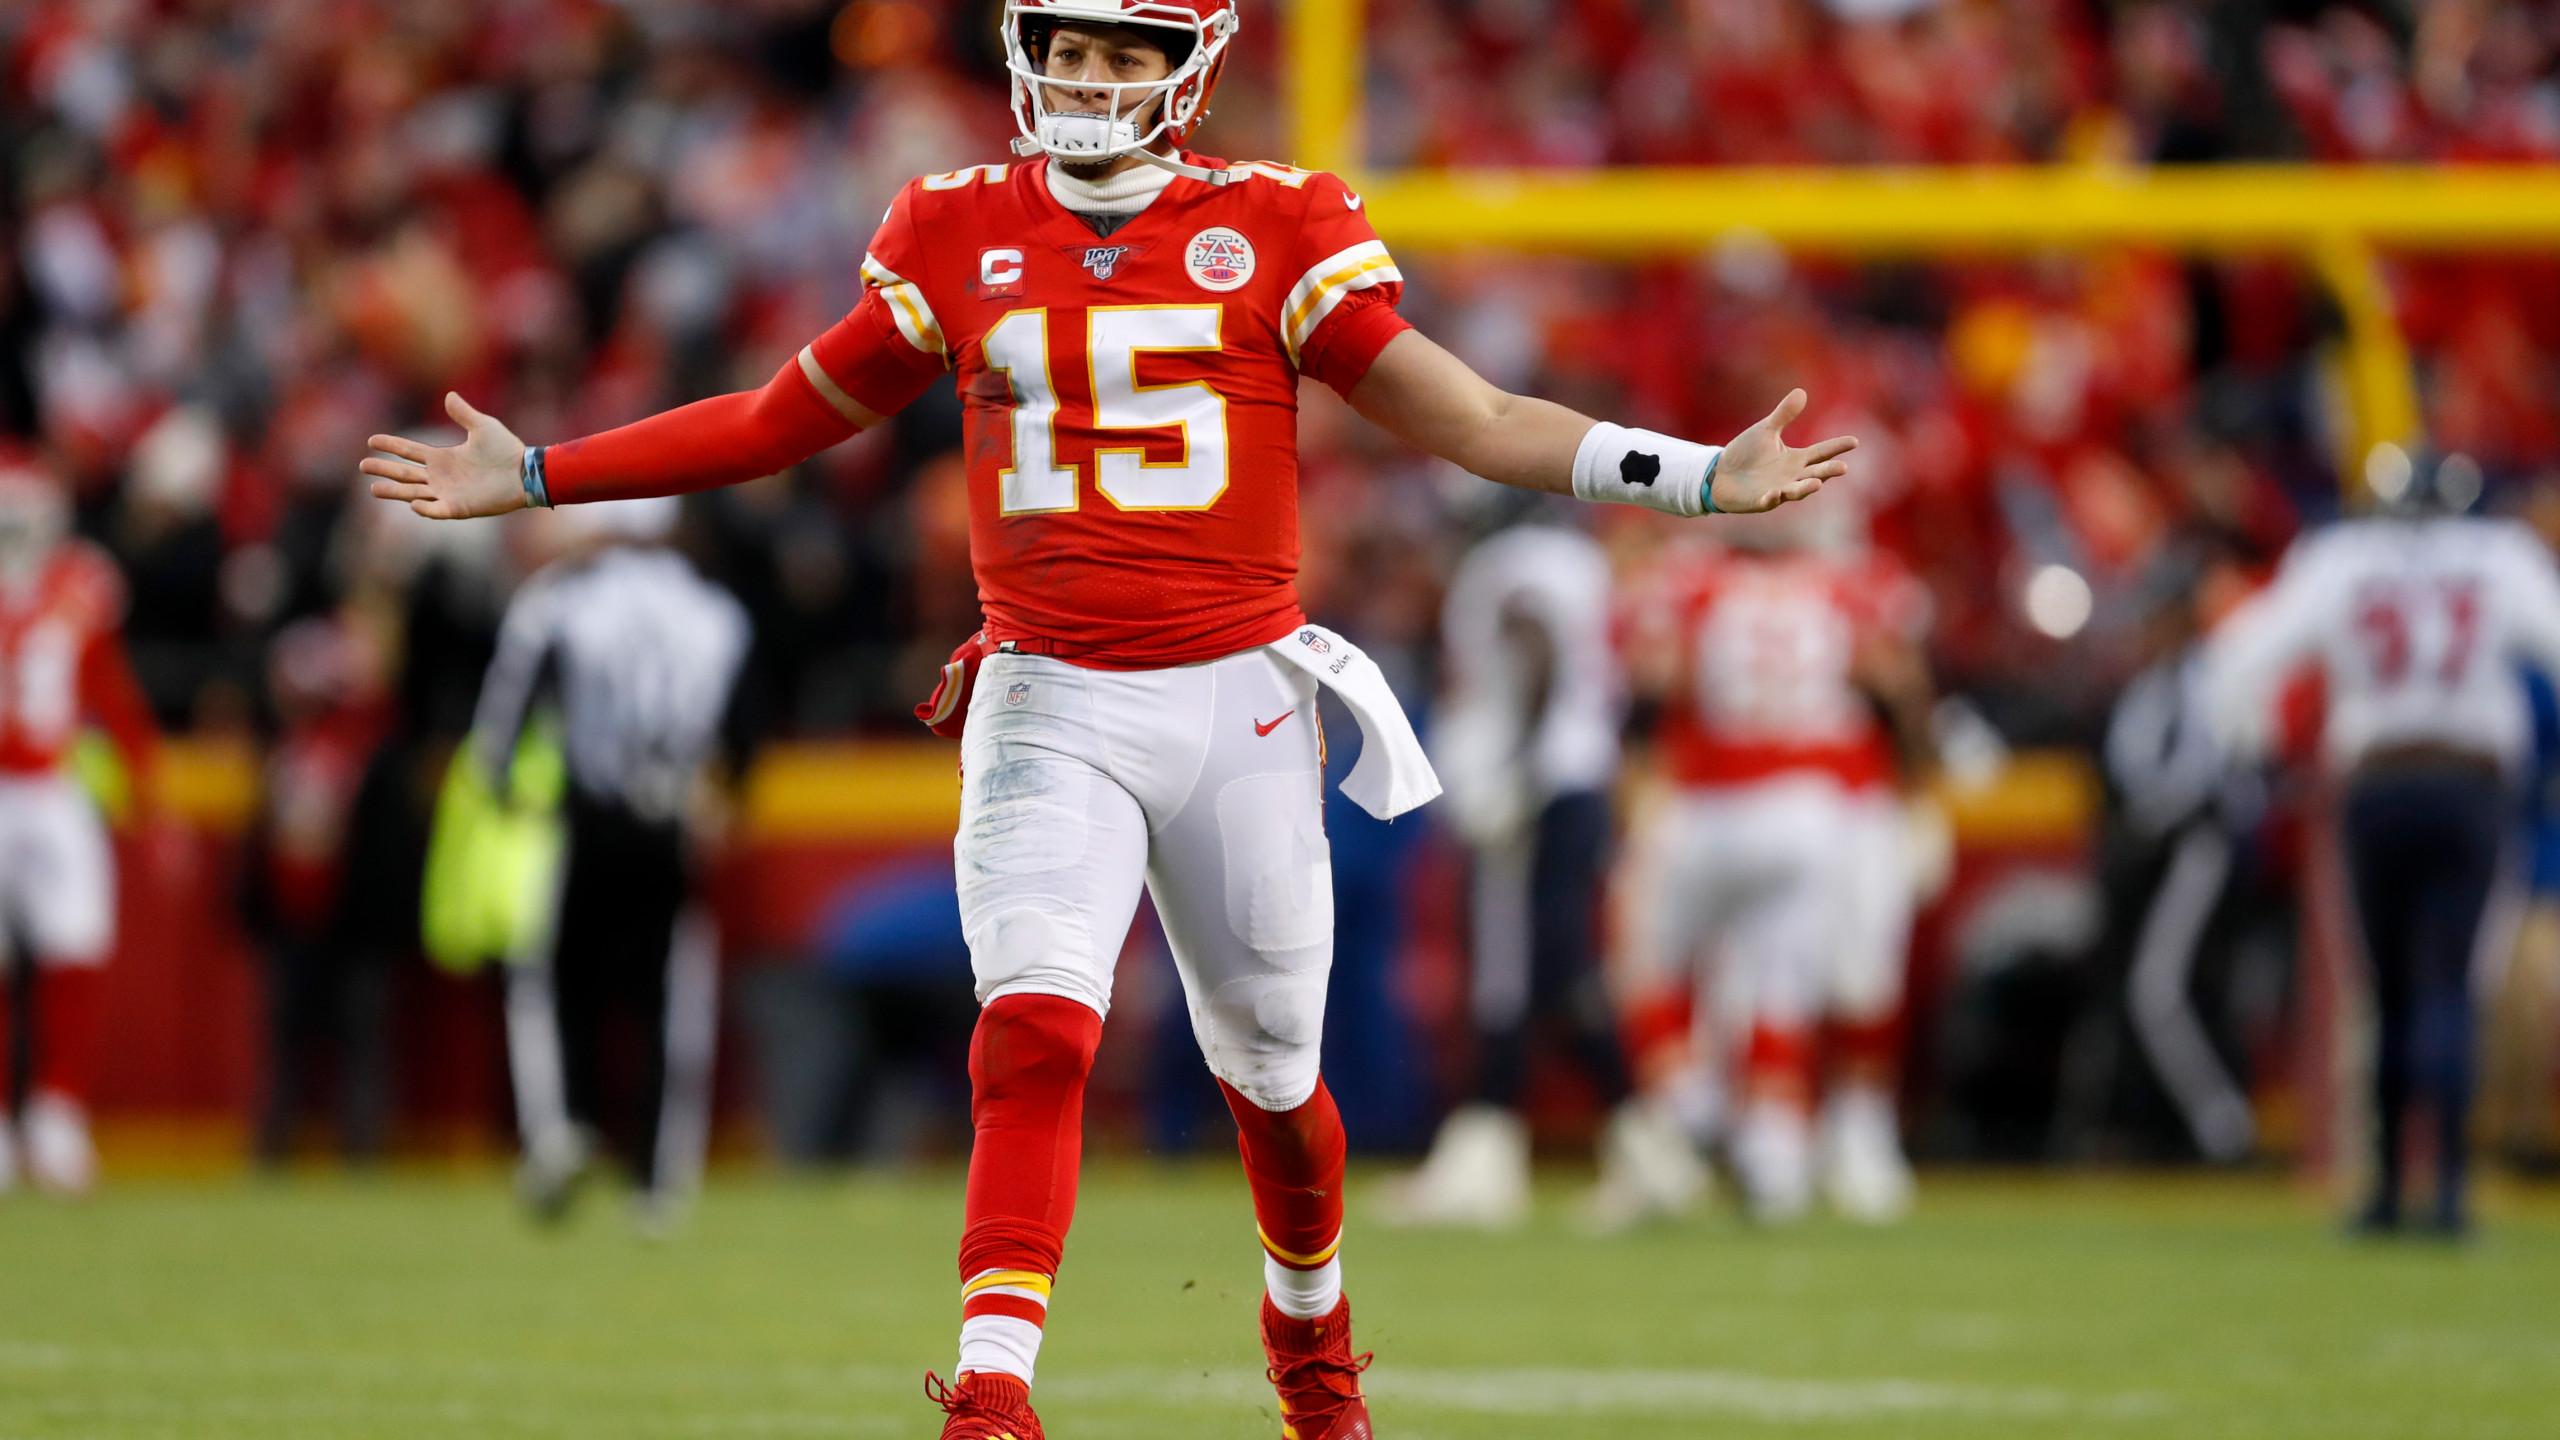 Stage is set: Chiefs, Titans to battle for AFC Championship. KTVE